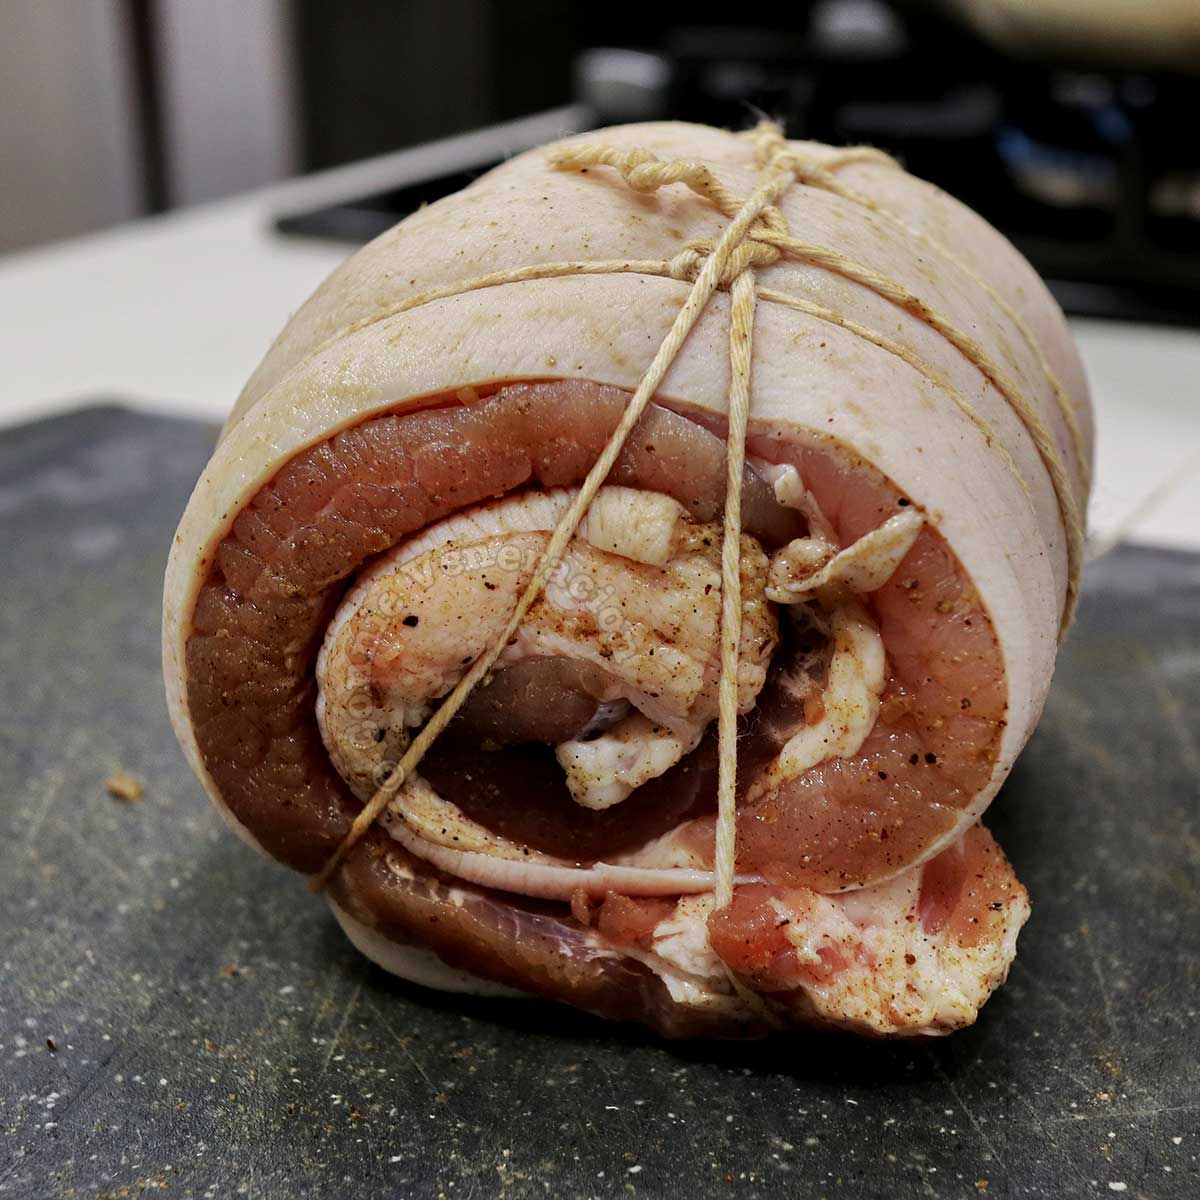 Rolled pork belly tied with kitchen twine